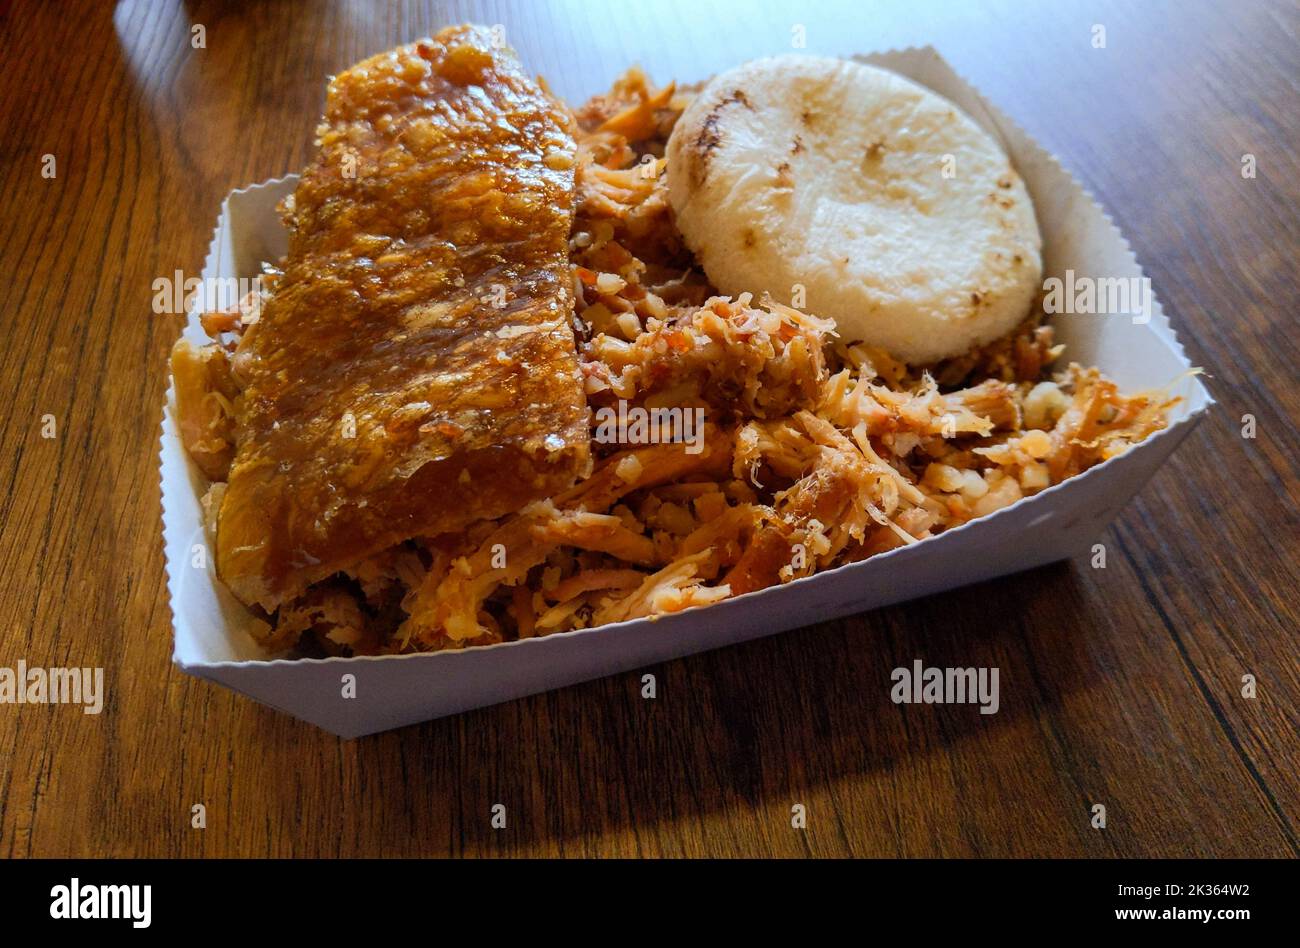 Lechona, a typical Colombian dish based on rice and pork and arepa. Stock Photo